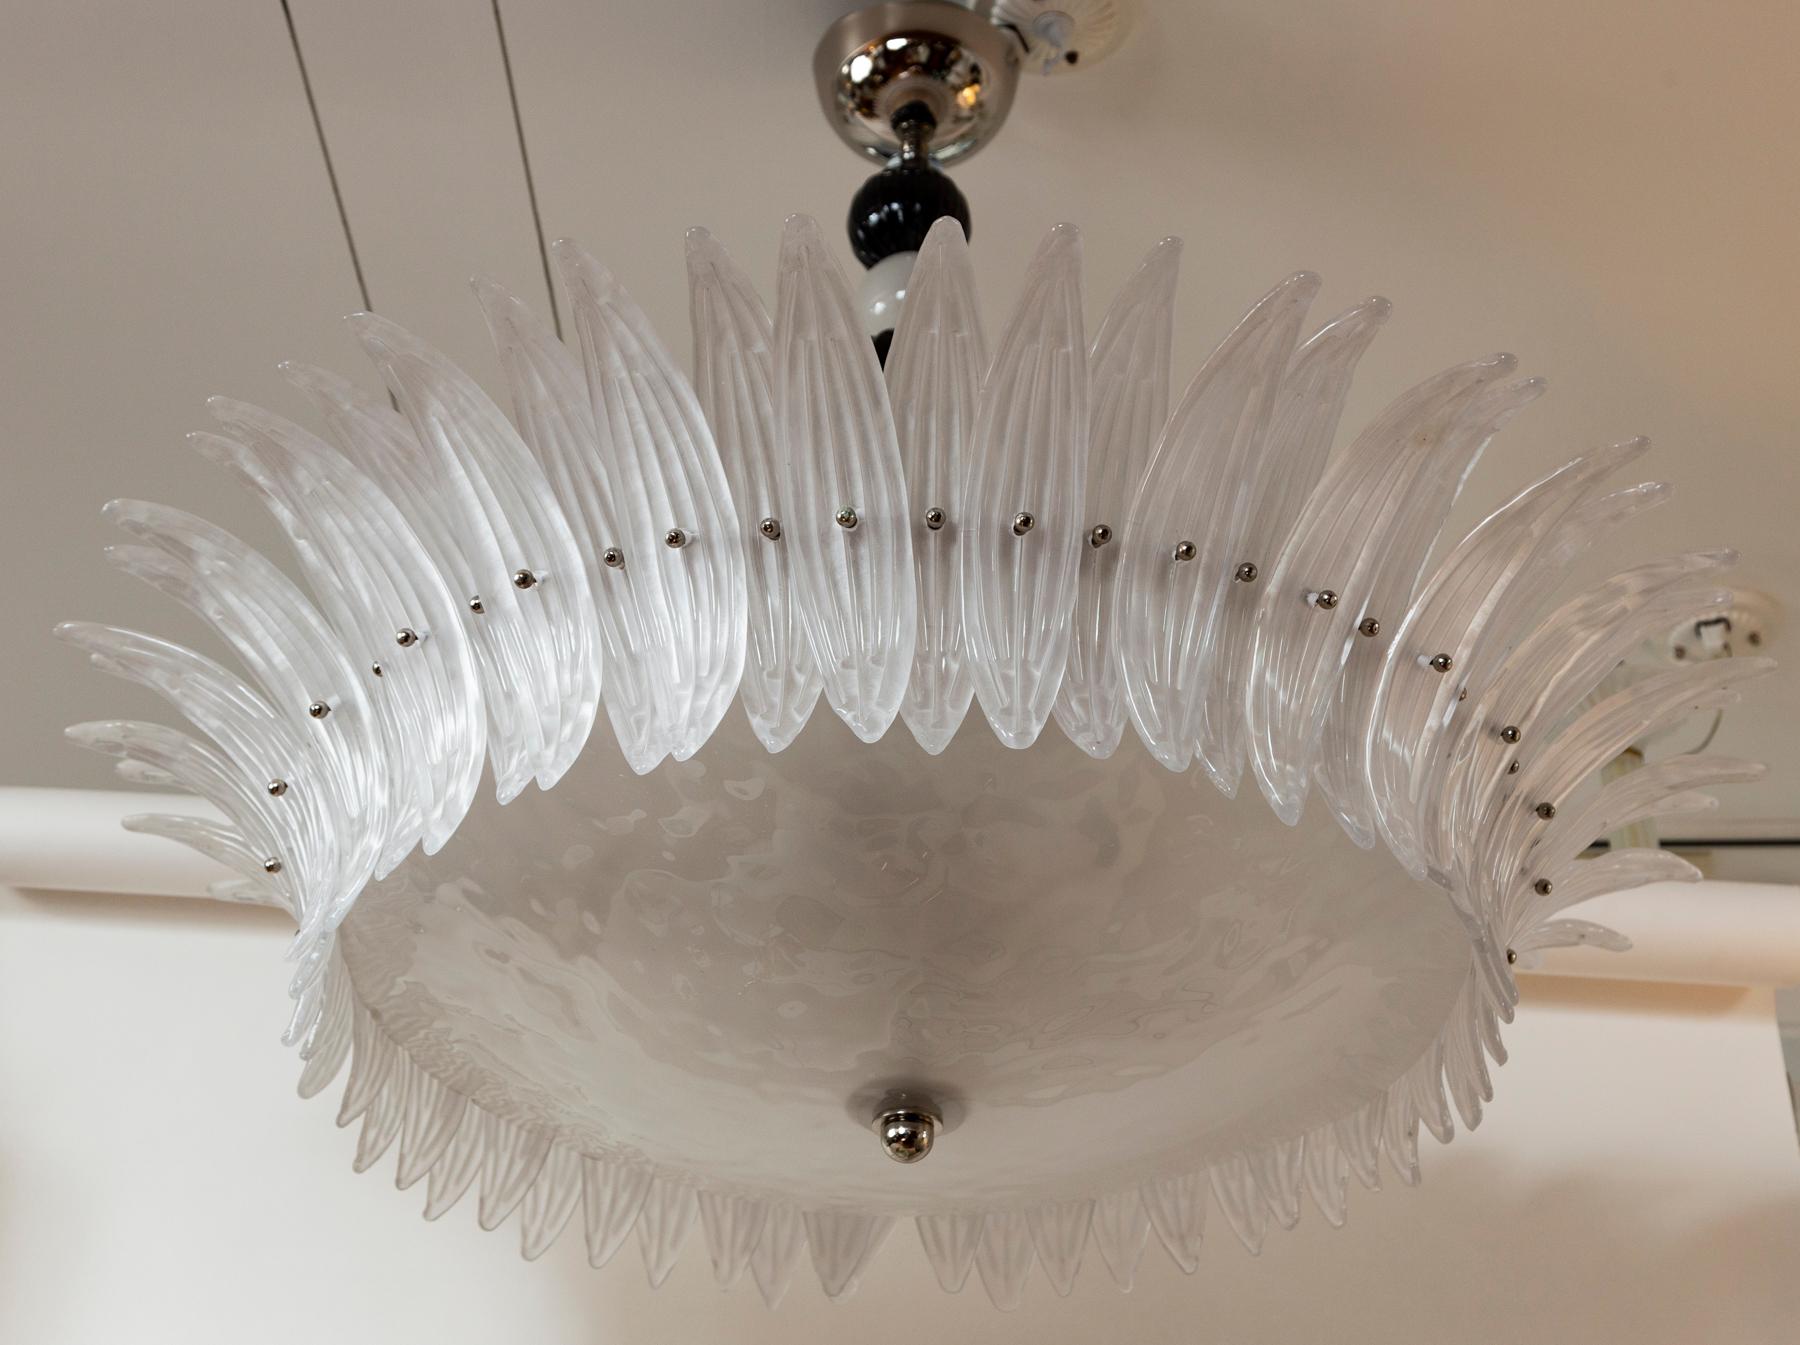 A large nickel polished ceiling fixture comprised of a glass blown dome shaped glass dish surrounded by 60 opaque white blown palm leaves and suspended by a central stem adorned with black and white balls.

Sold as electrified to US code with 6